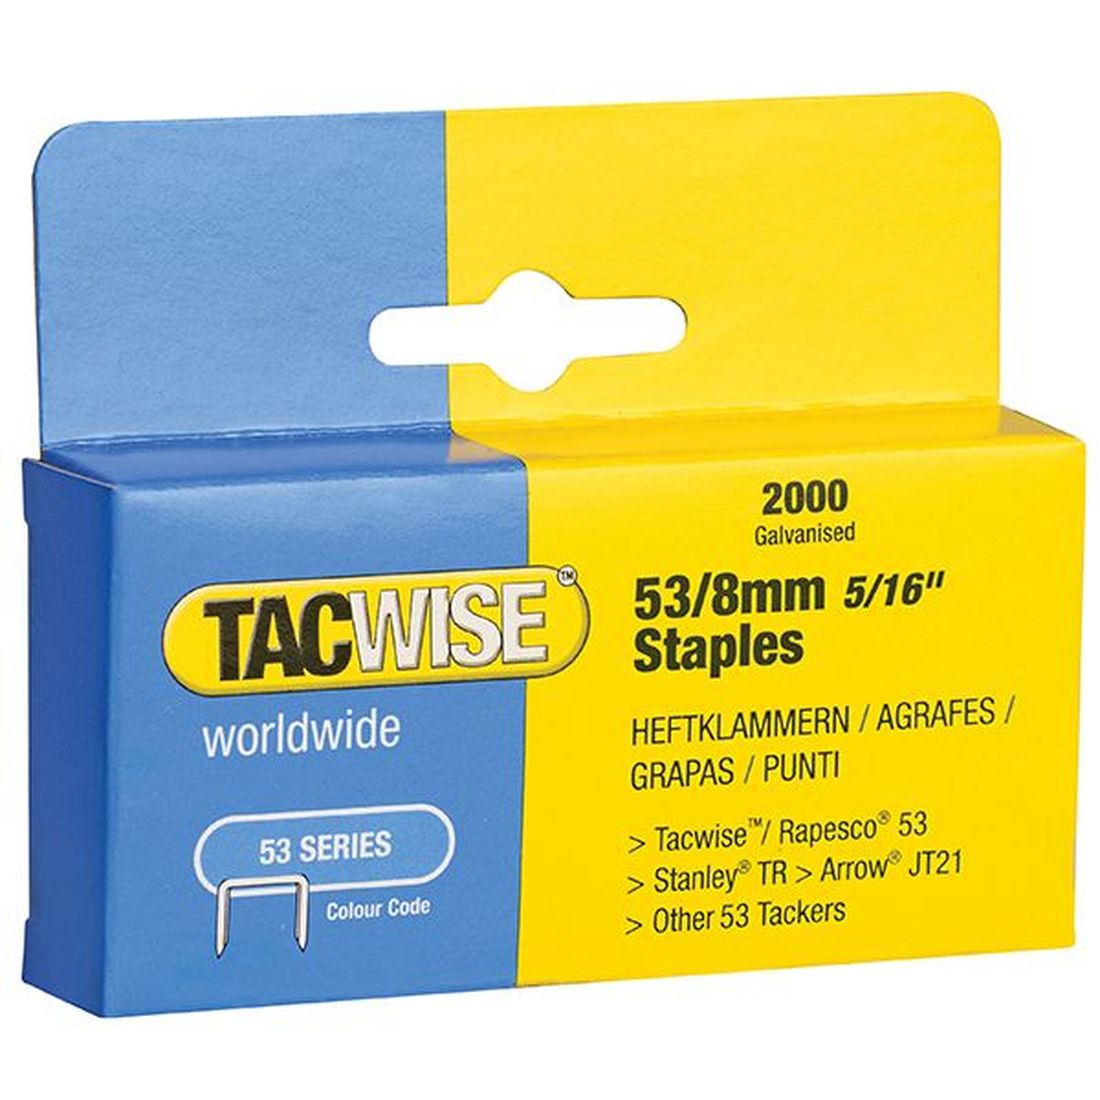 Tacwise 53 Light-Duty Staples 8mm (Type JT21  A) (Pack 2000)                            